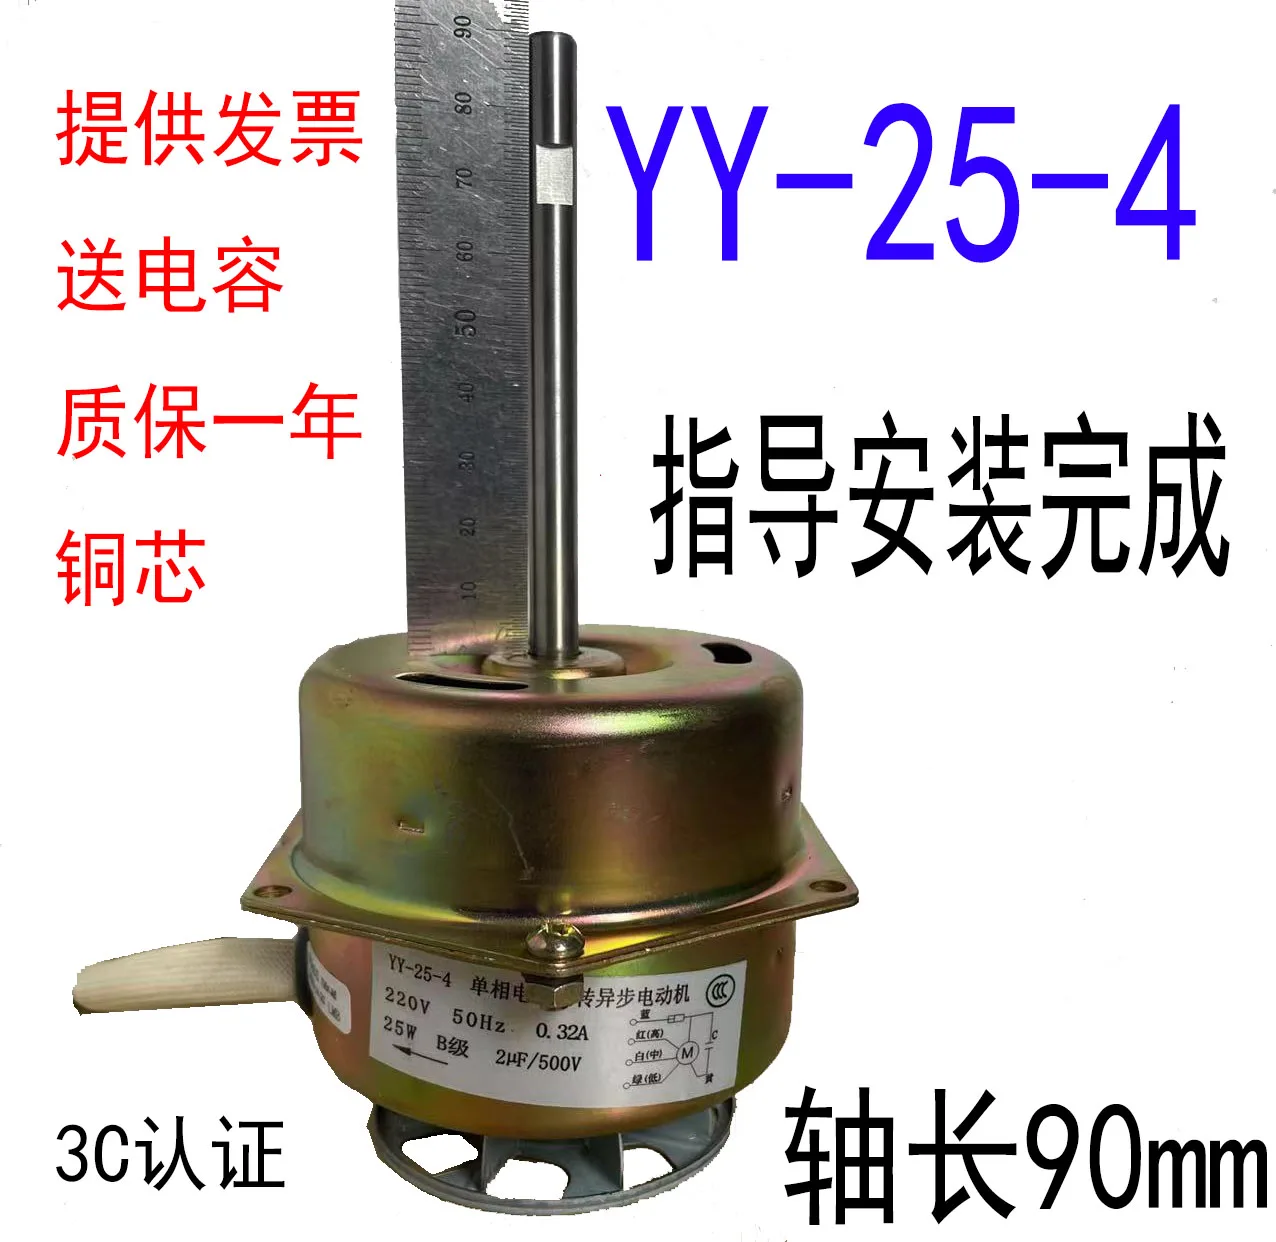 

Single-Phase Capacitor Running Asynchronous Motor YY-25-4(C2-A) Incubator Oven Motor YY-25-4P